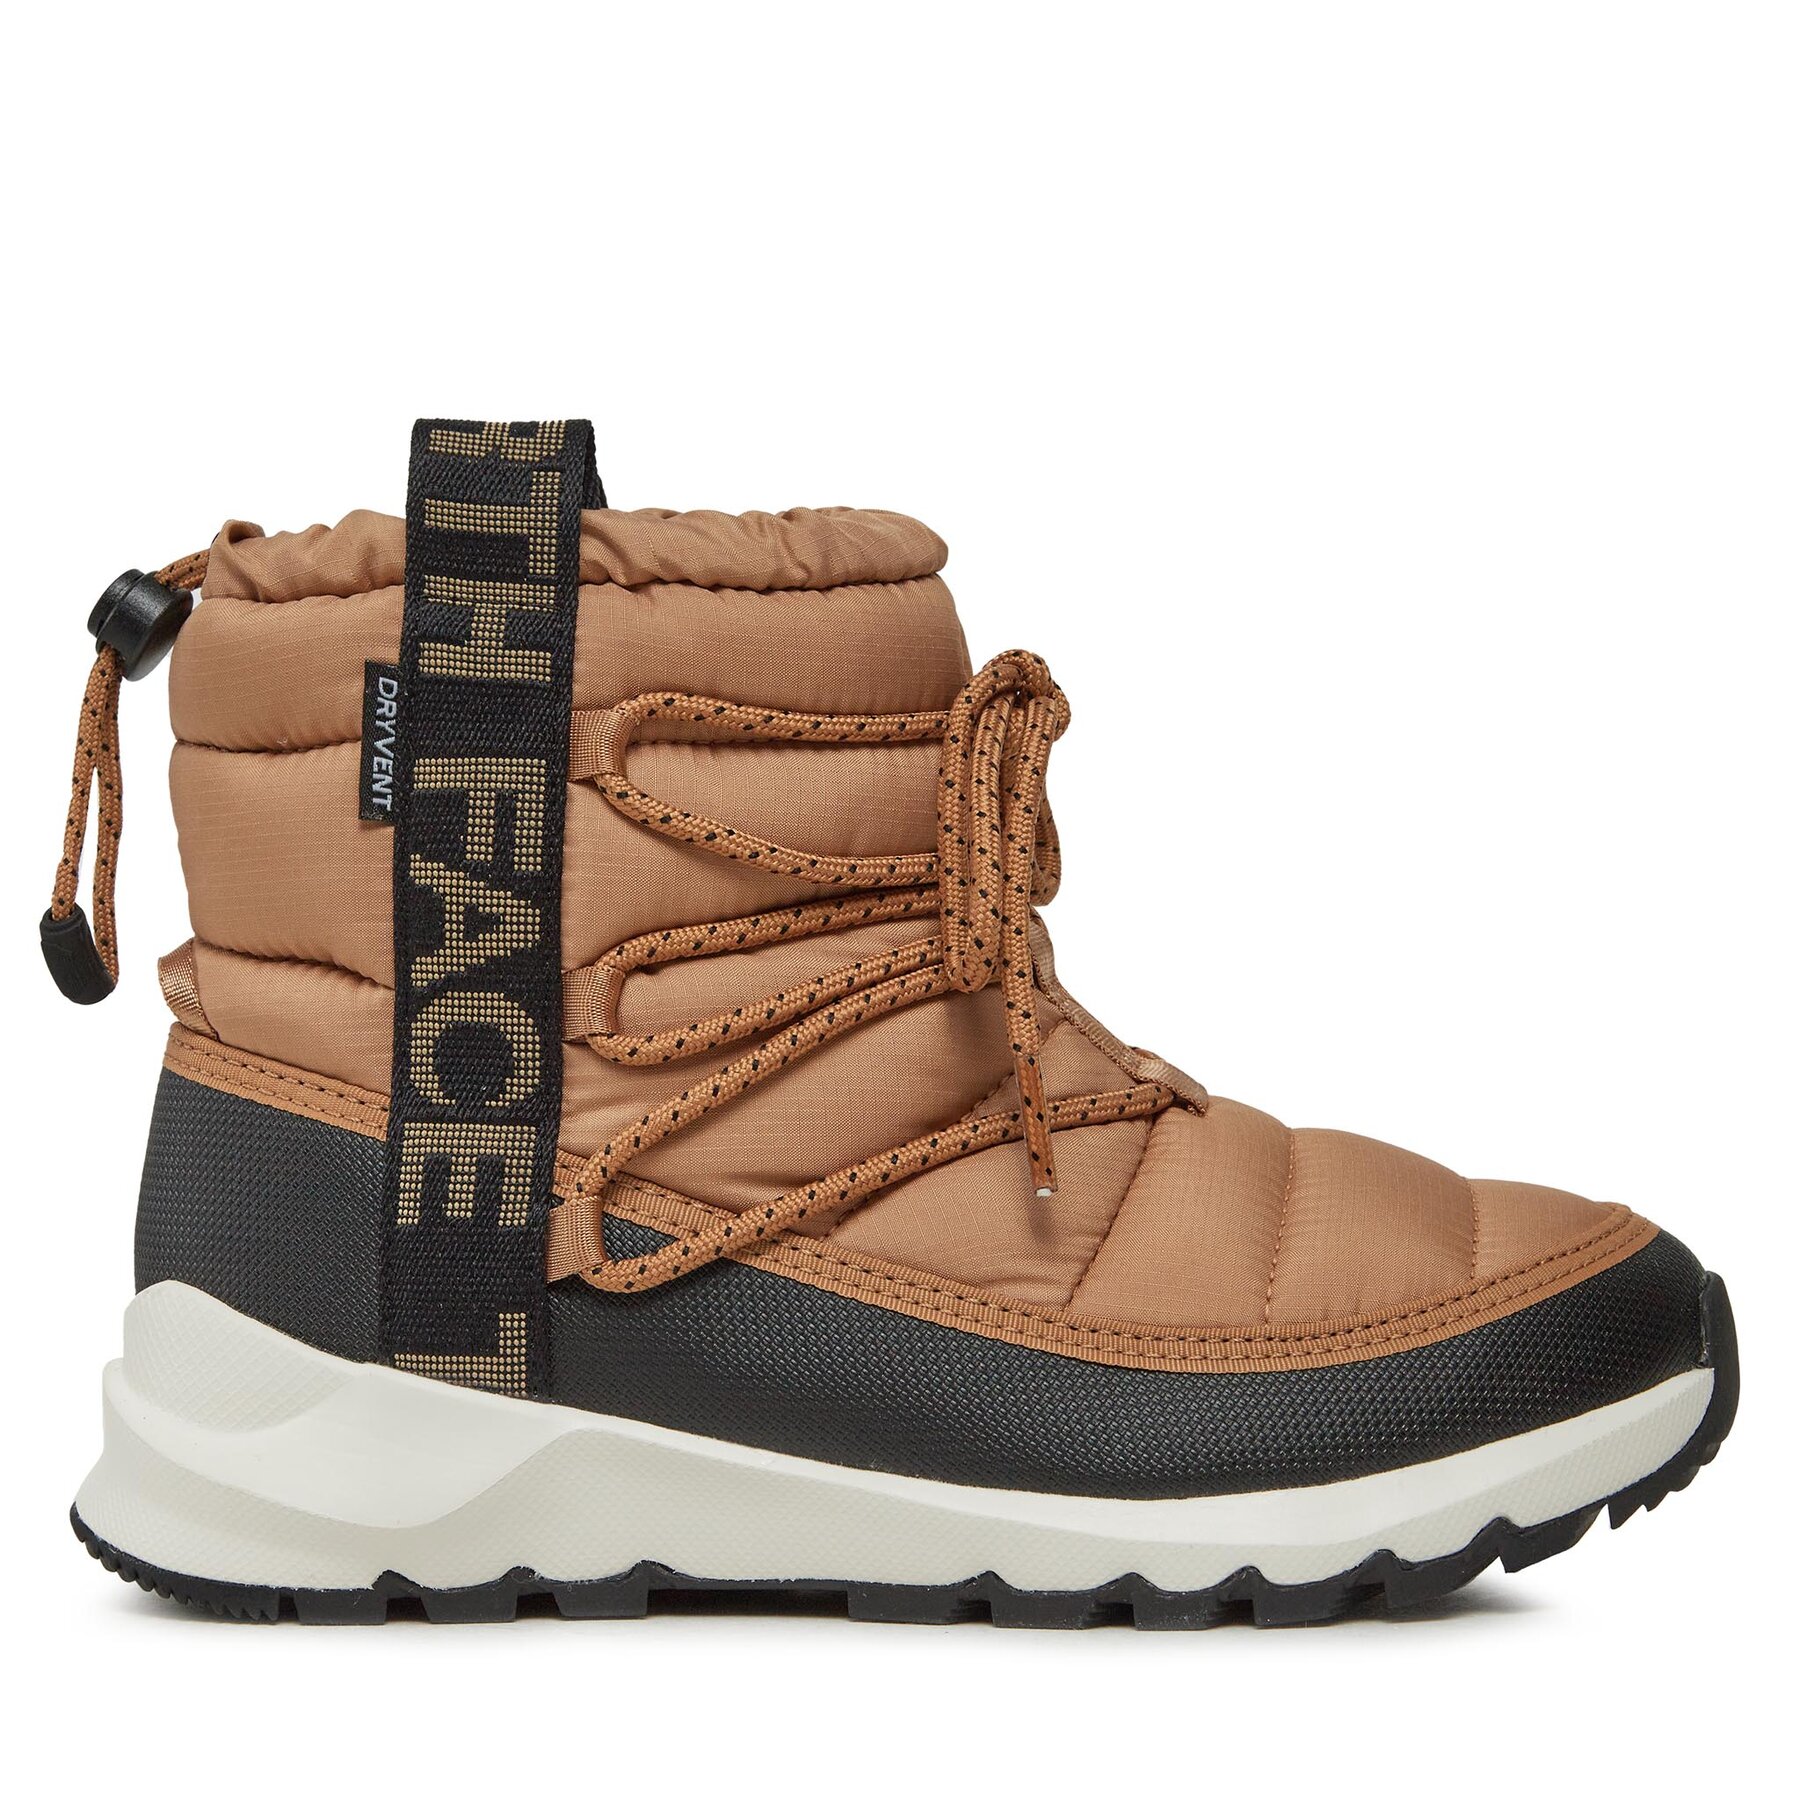 The North Face Women Thermoball Lace Up WP almondbutter/tnfblack - Zapatos de invierno